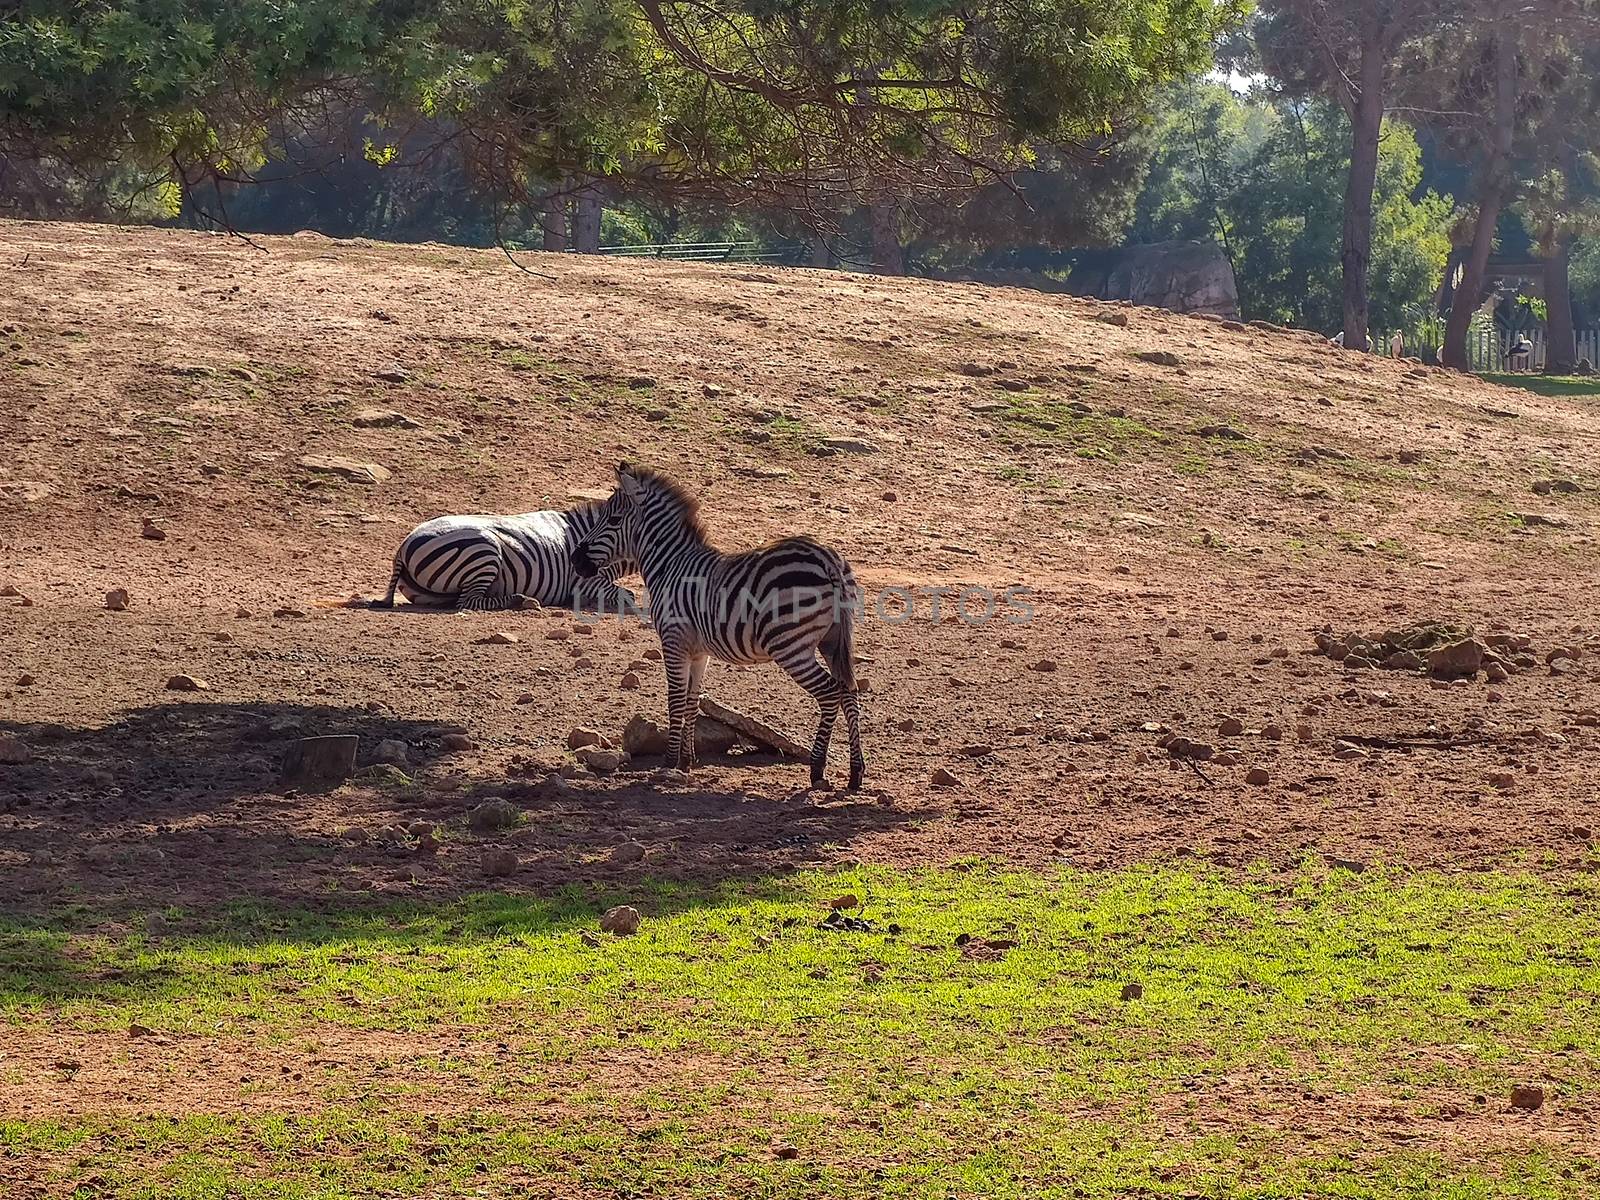 Two zebras one of them sitting and the other standing